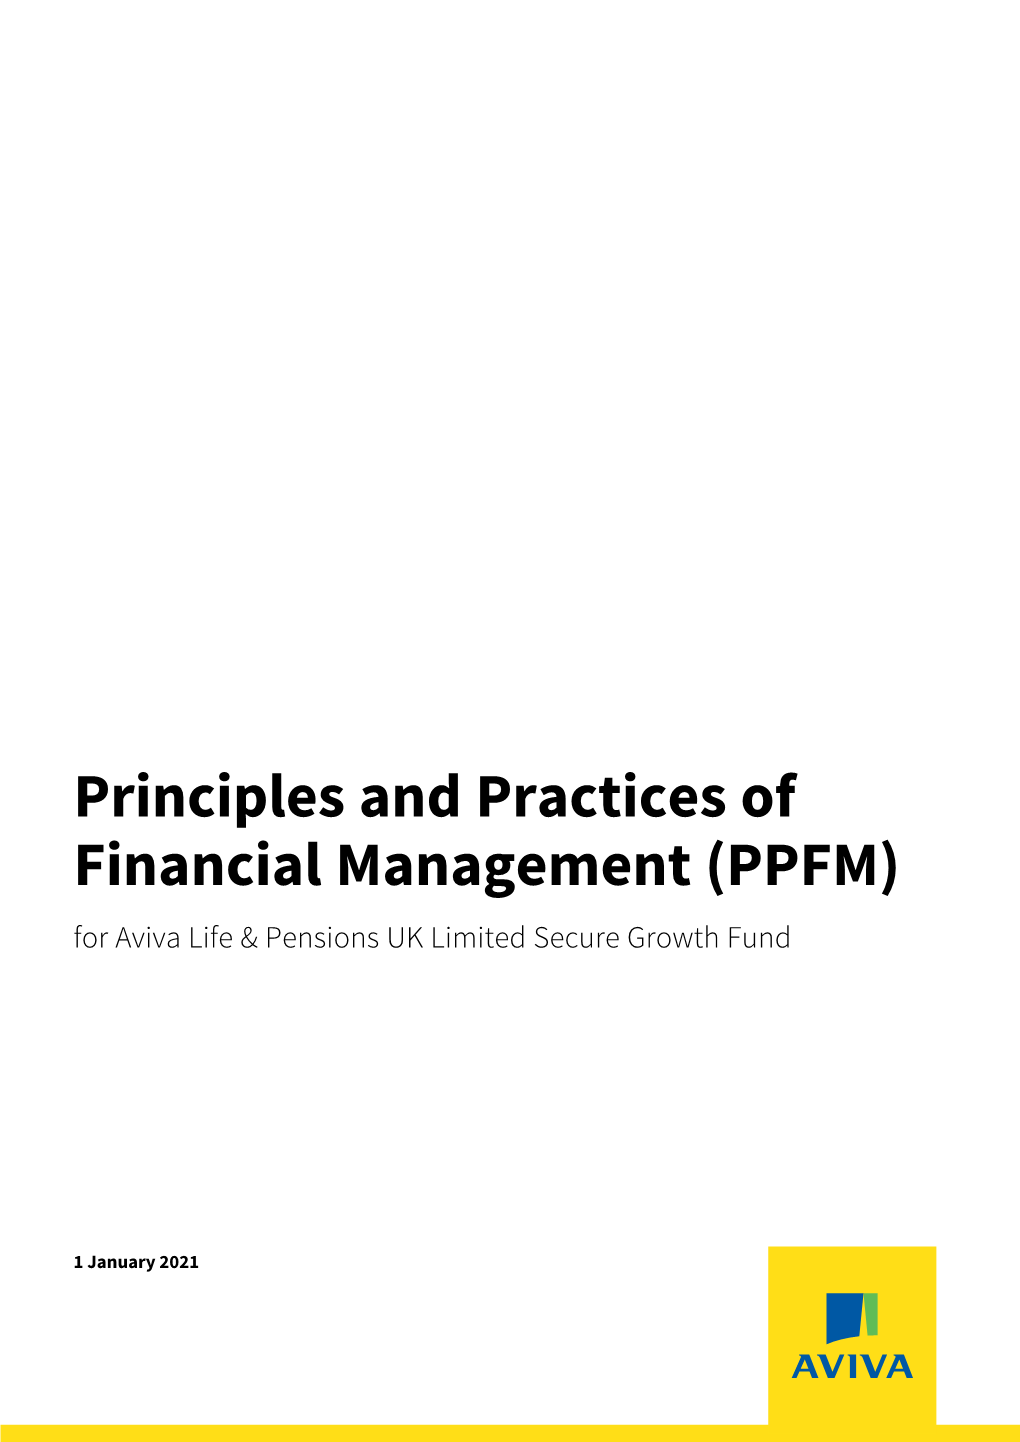 Principles and Practices of Financial Management (PPFM) for Aviva Life & Pensions UK Limited Secure Growth Fund